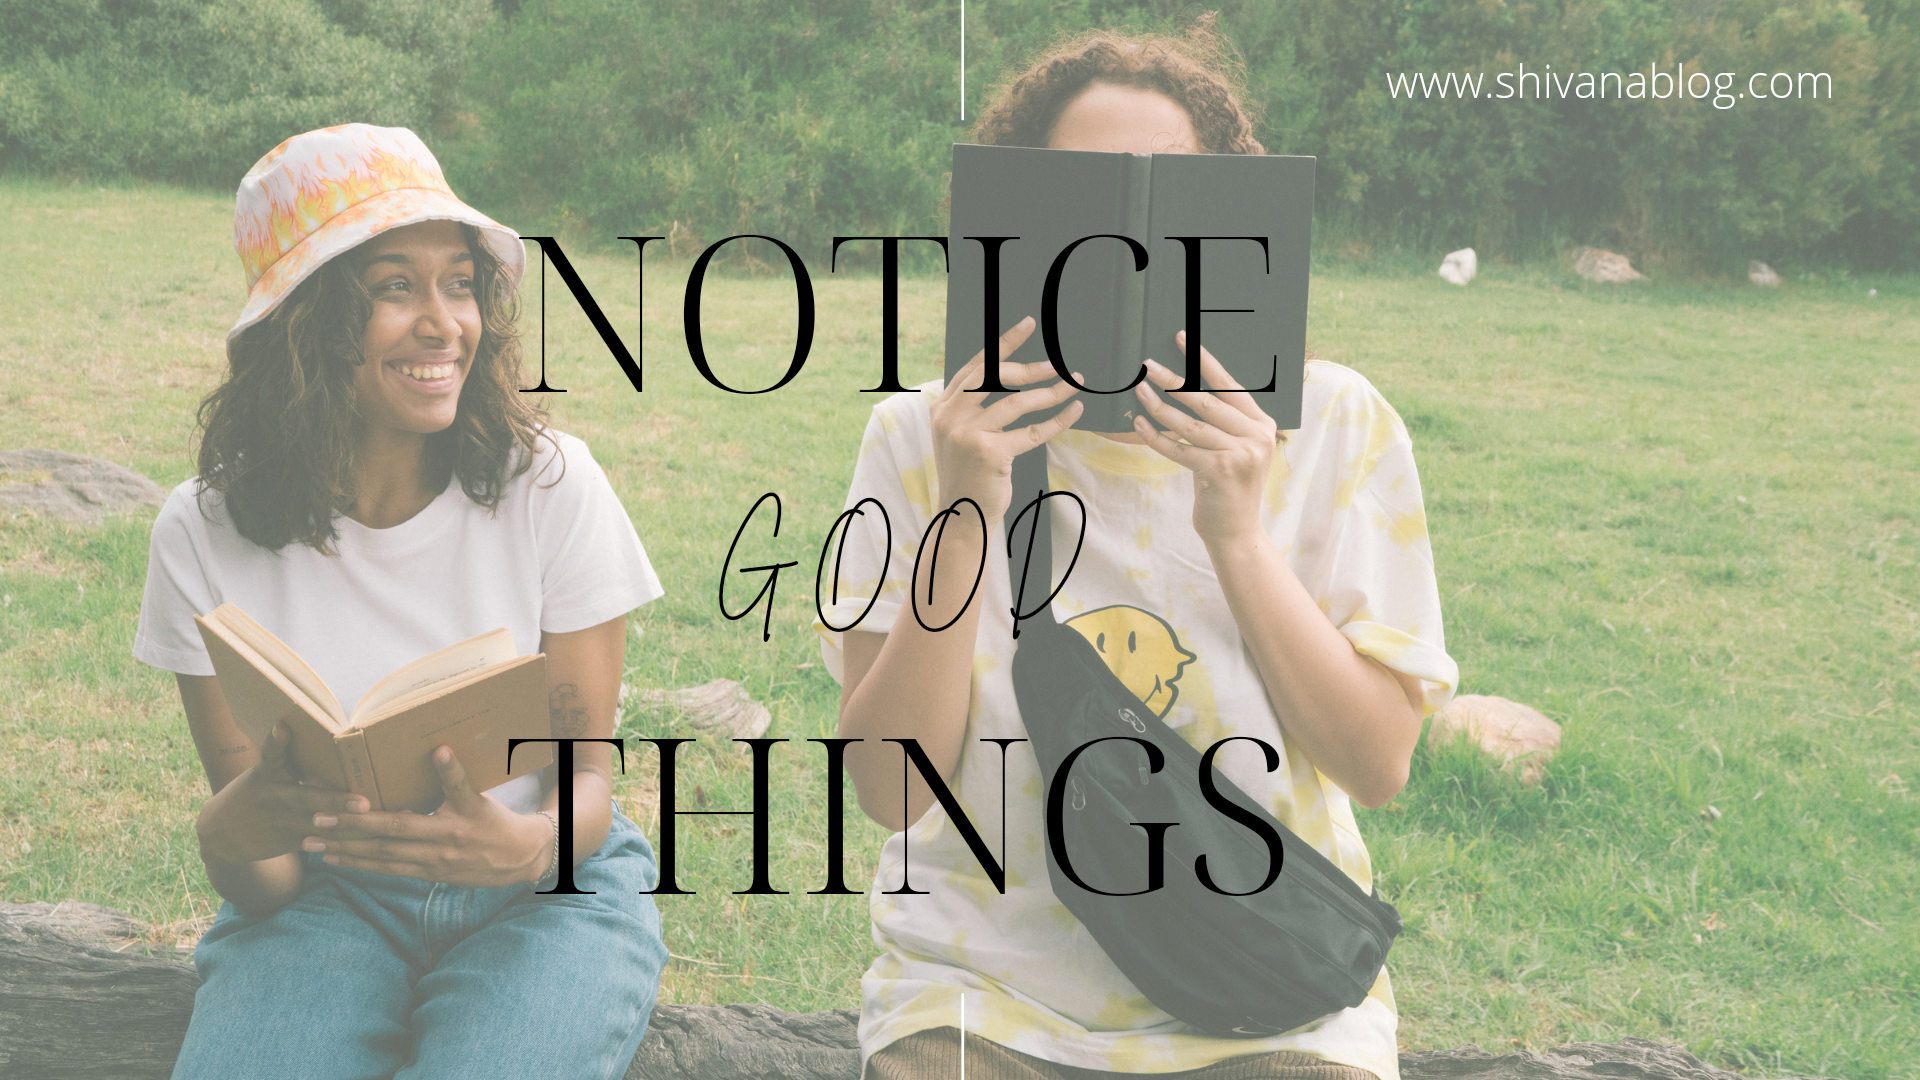 How to notice good things and avoid neagtivity- Shivana Blog